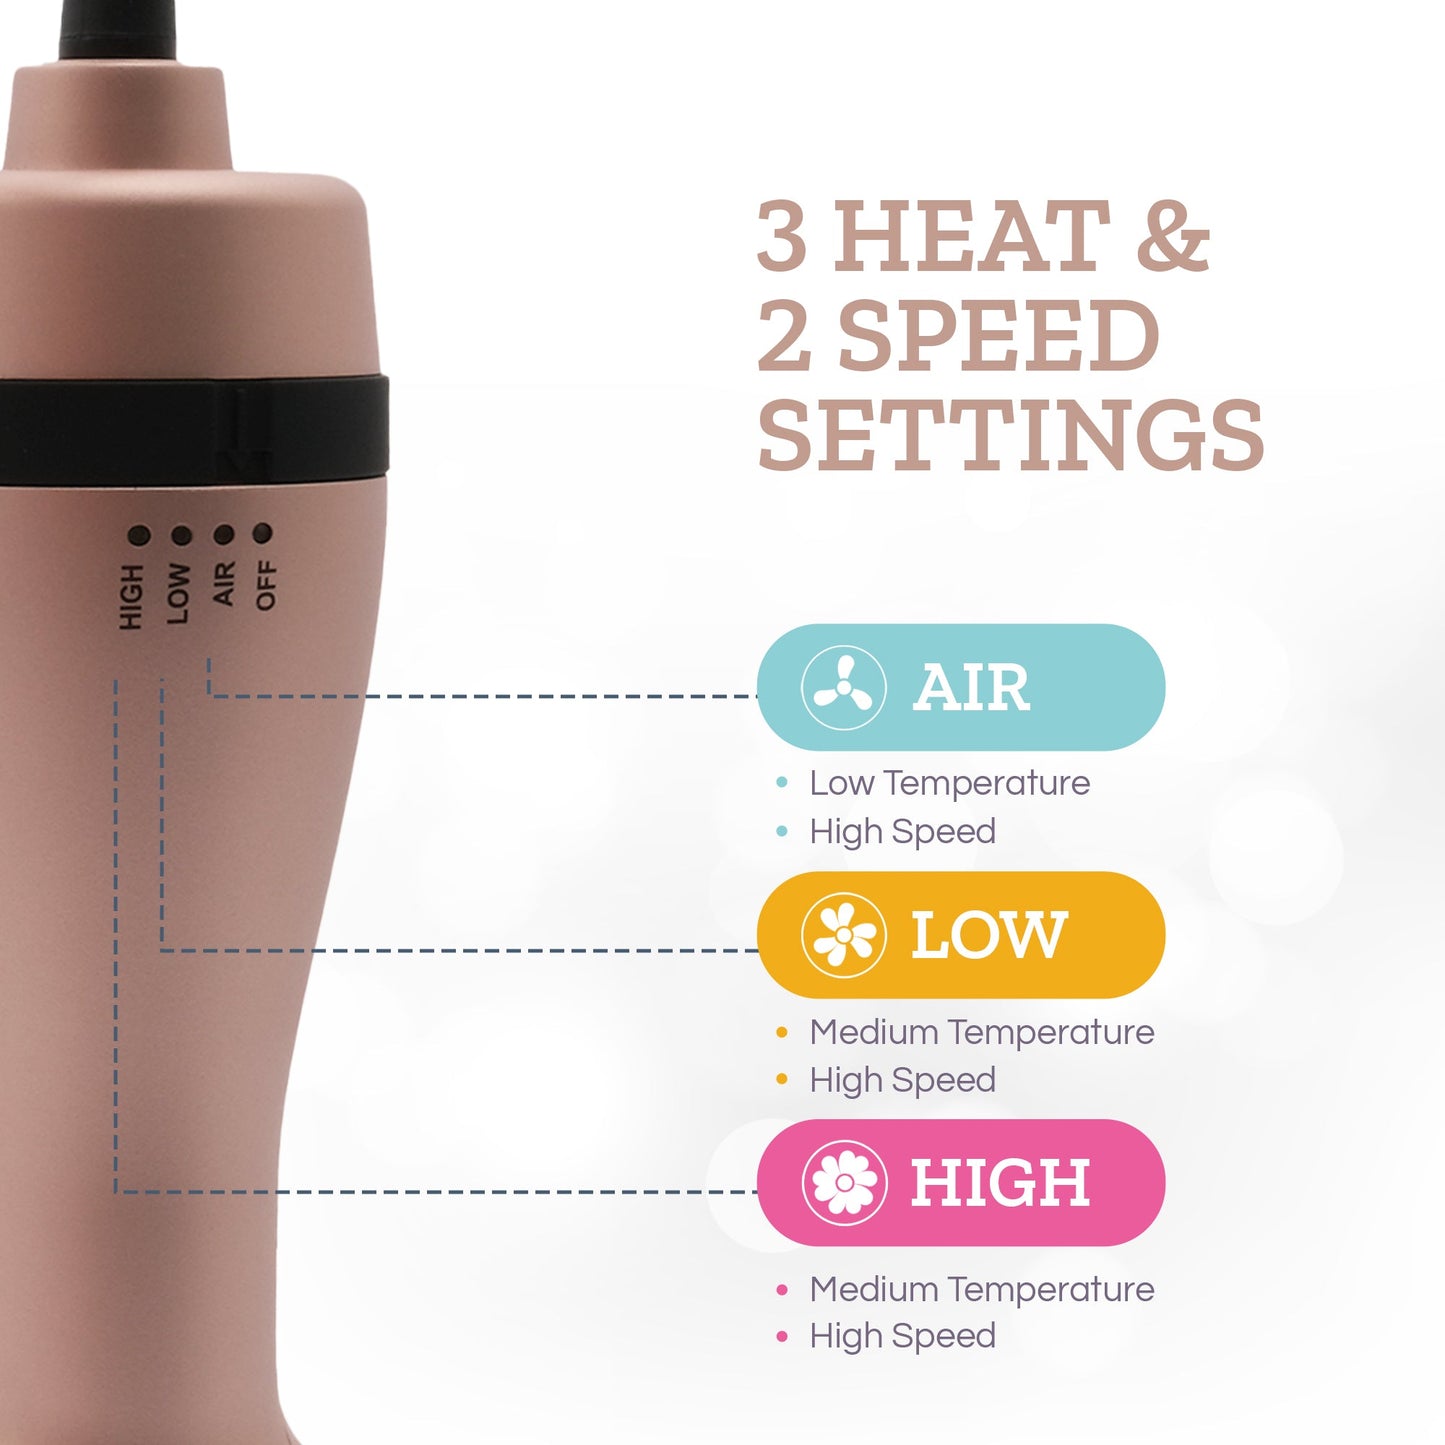 Couture Hair Pro Hot Air Brush - 3 in 1 Hair Straightening Brush, Volumizer & Dryer - Rose Gold - Couture Hair Pro